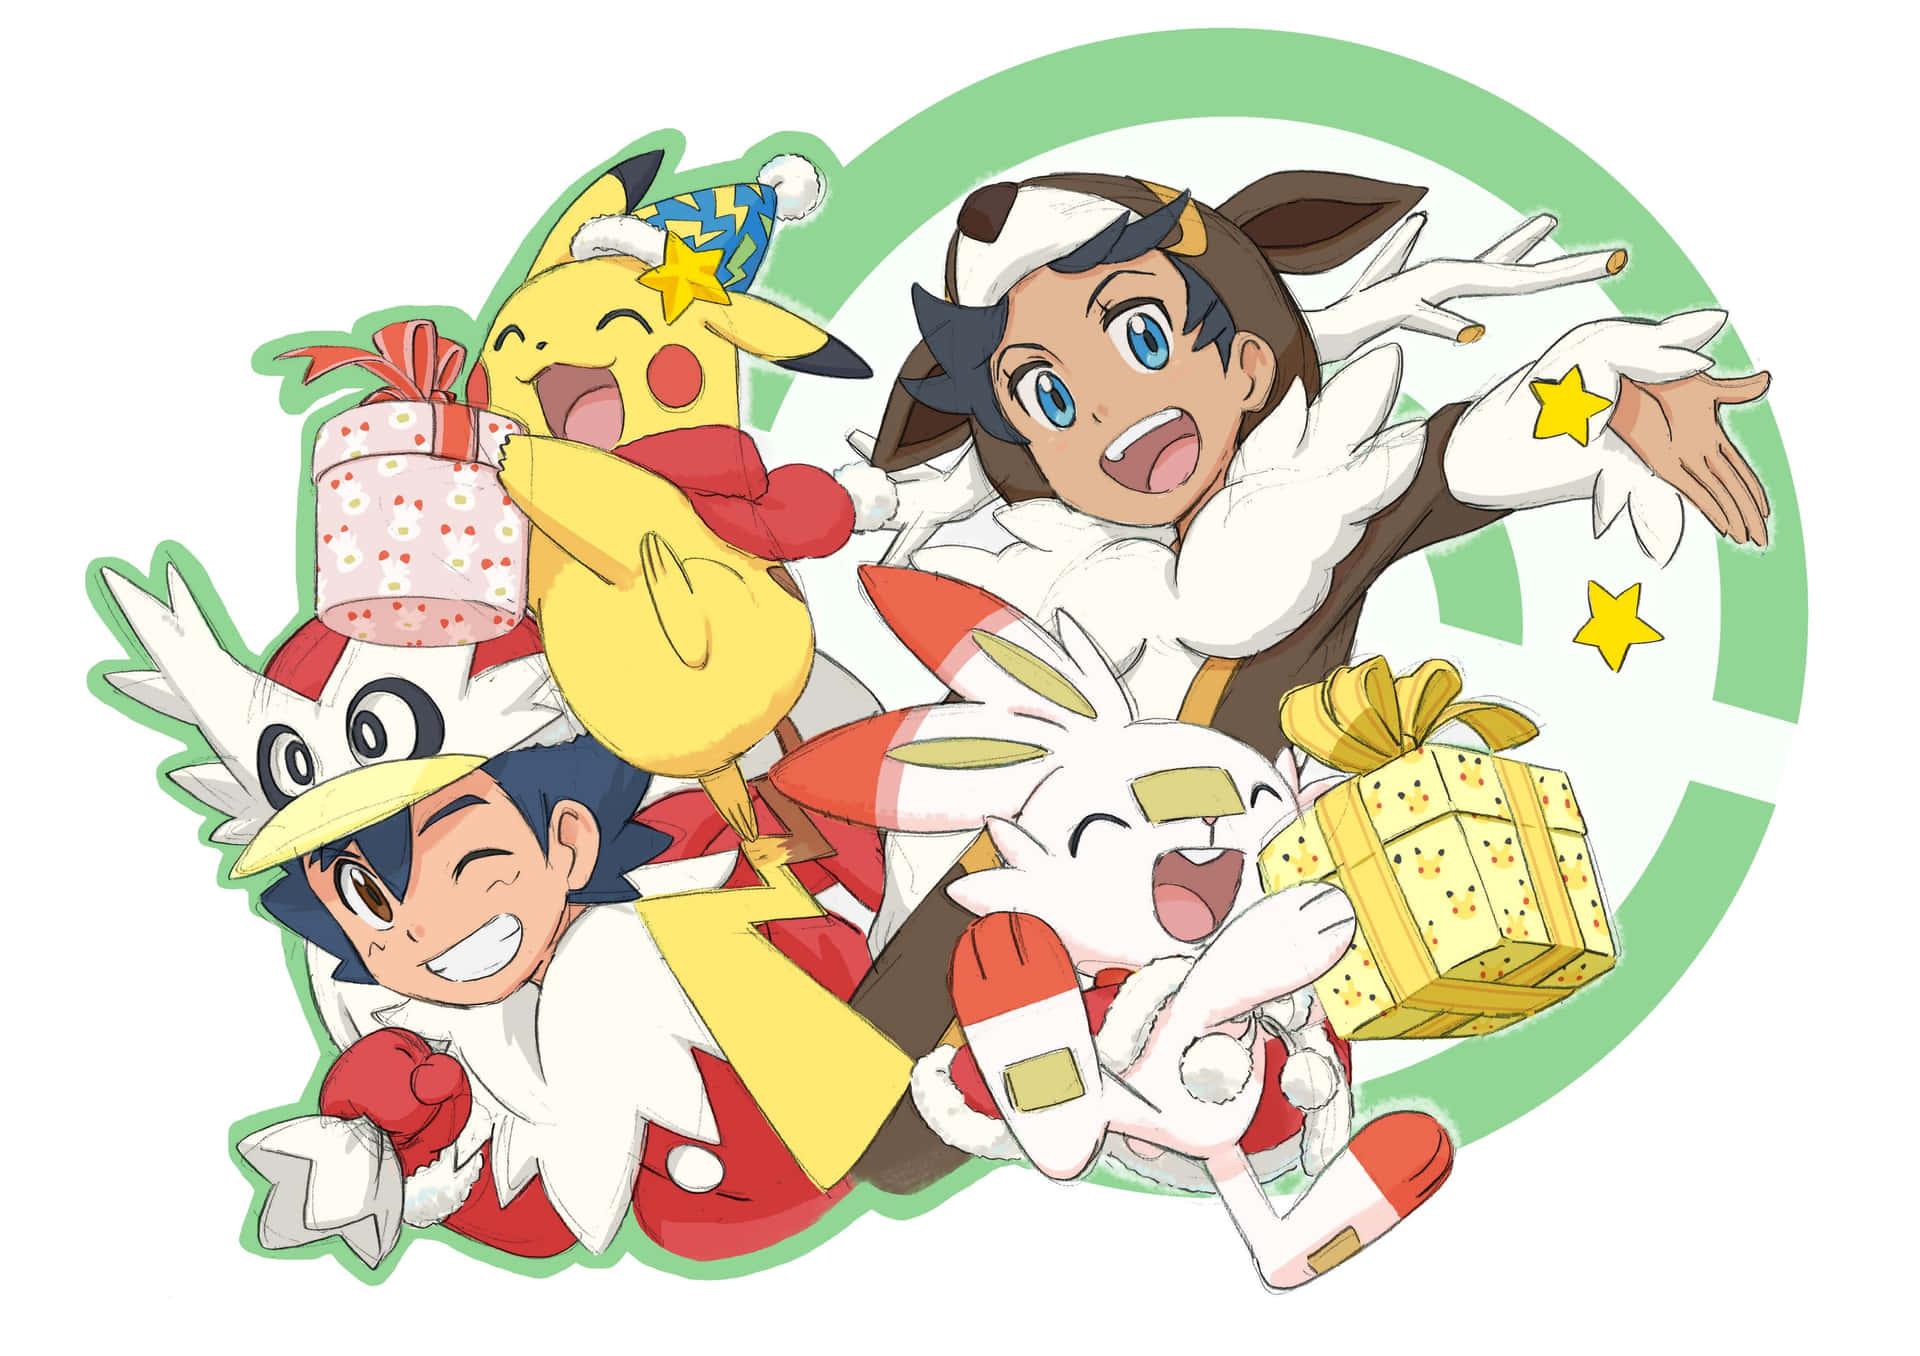 Pokémon Christmas Pikachu And Trainer With Gifts Wallpaper